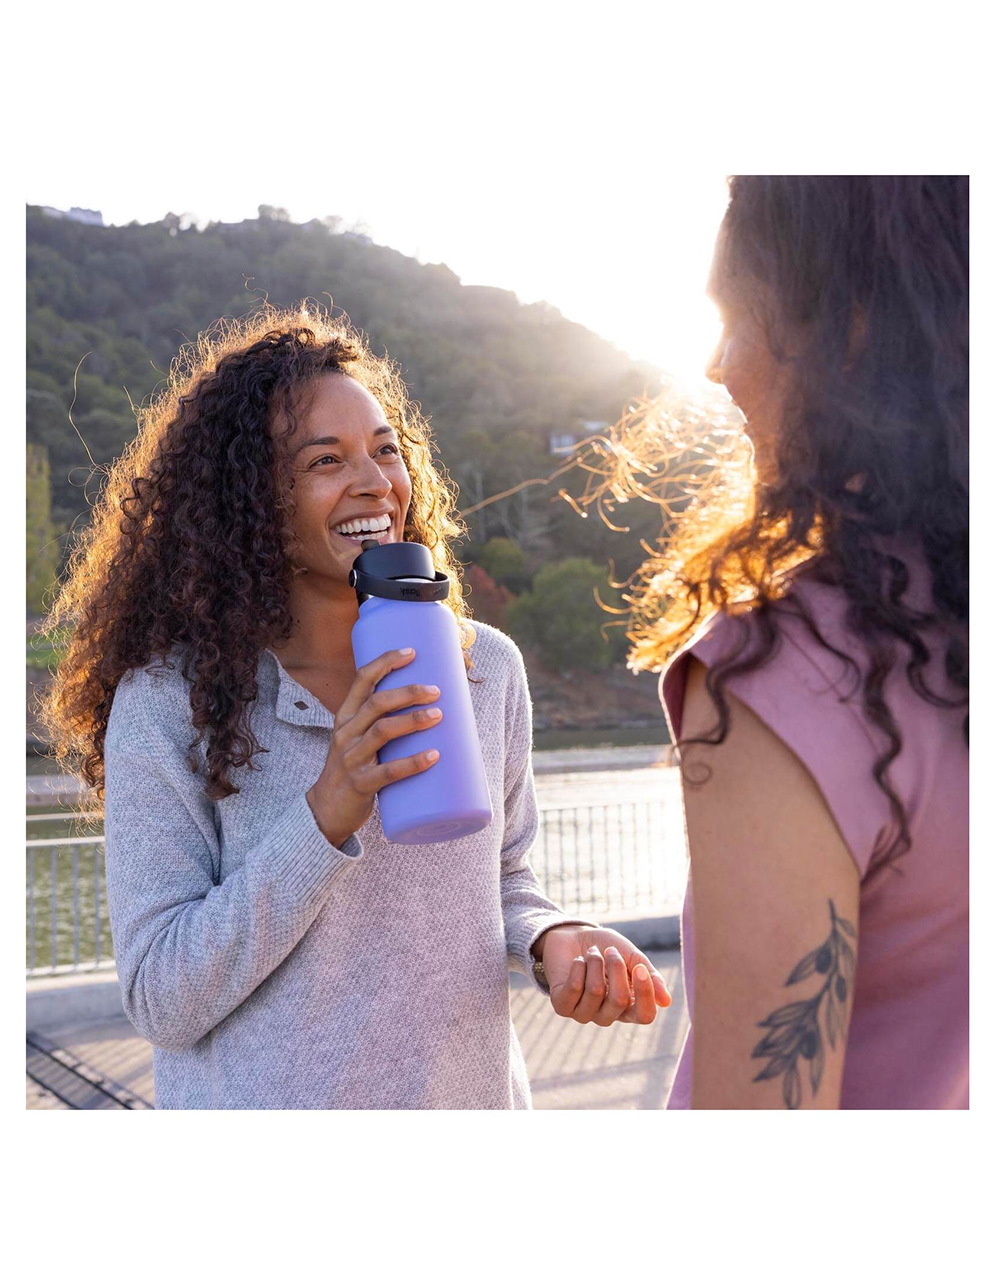 Hydro Flask 40 oz Wide Mouth Bottle (Pacific)